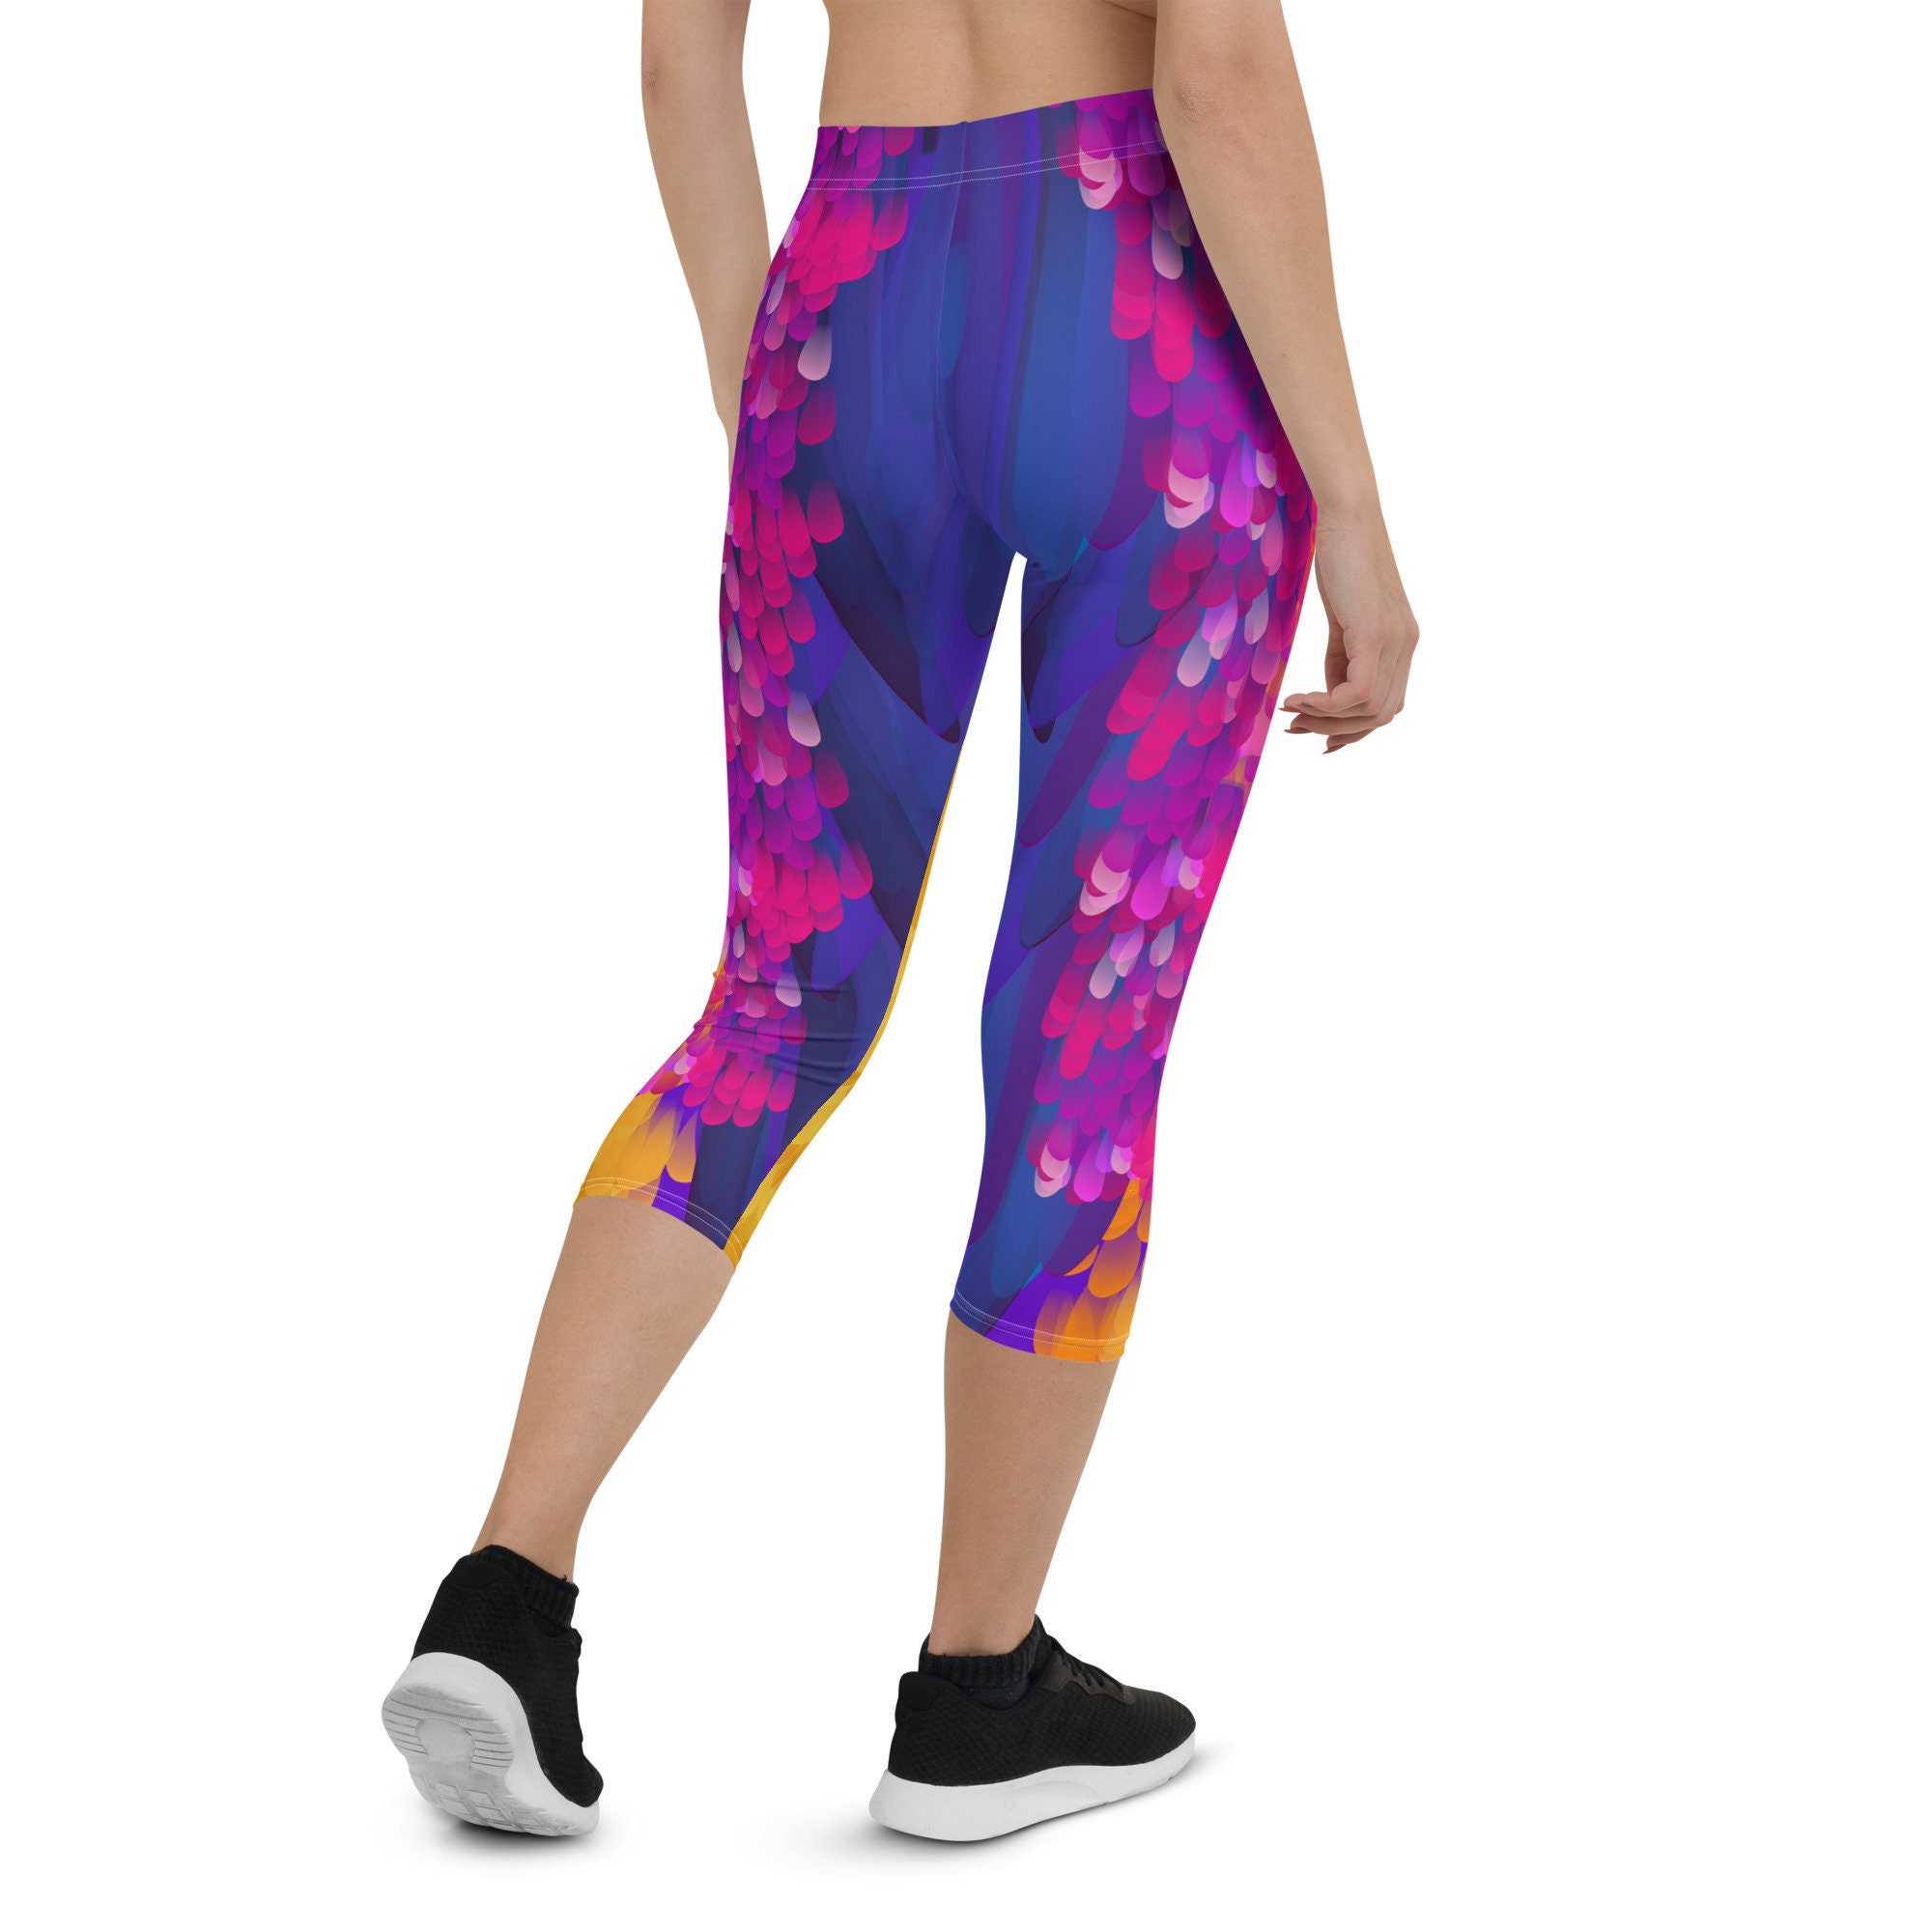 The Exotic Bird Adventure is Out There Up Running Costume Capri Leggings